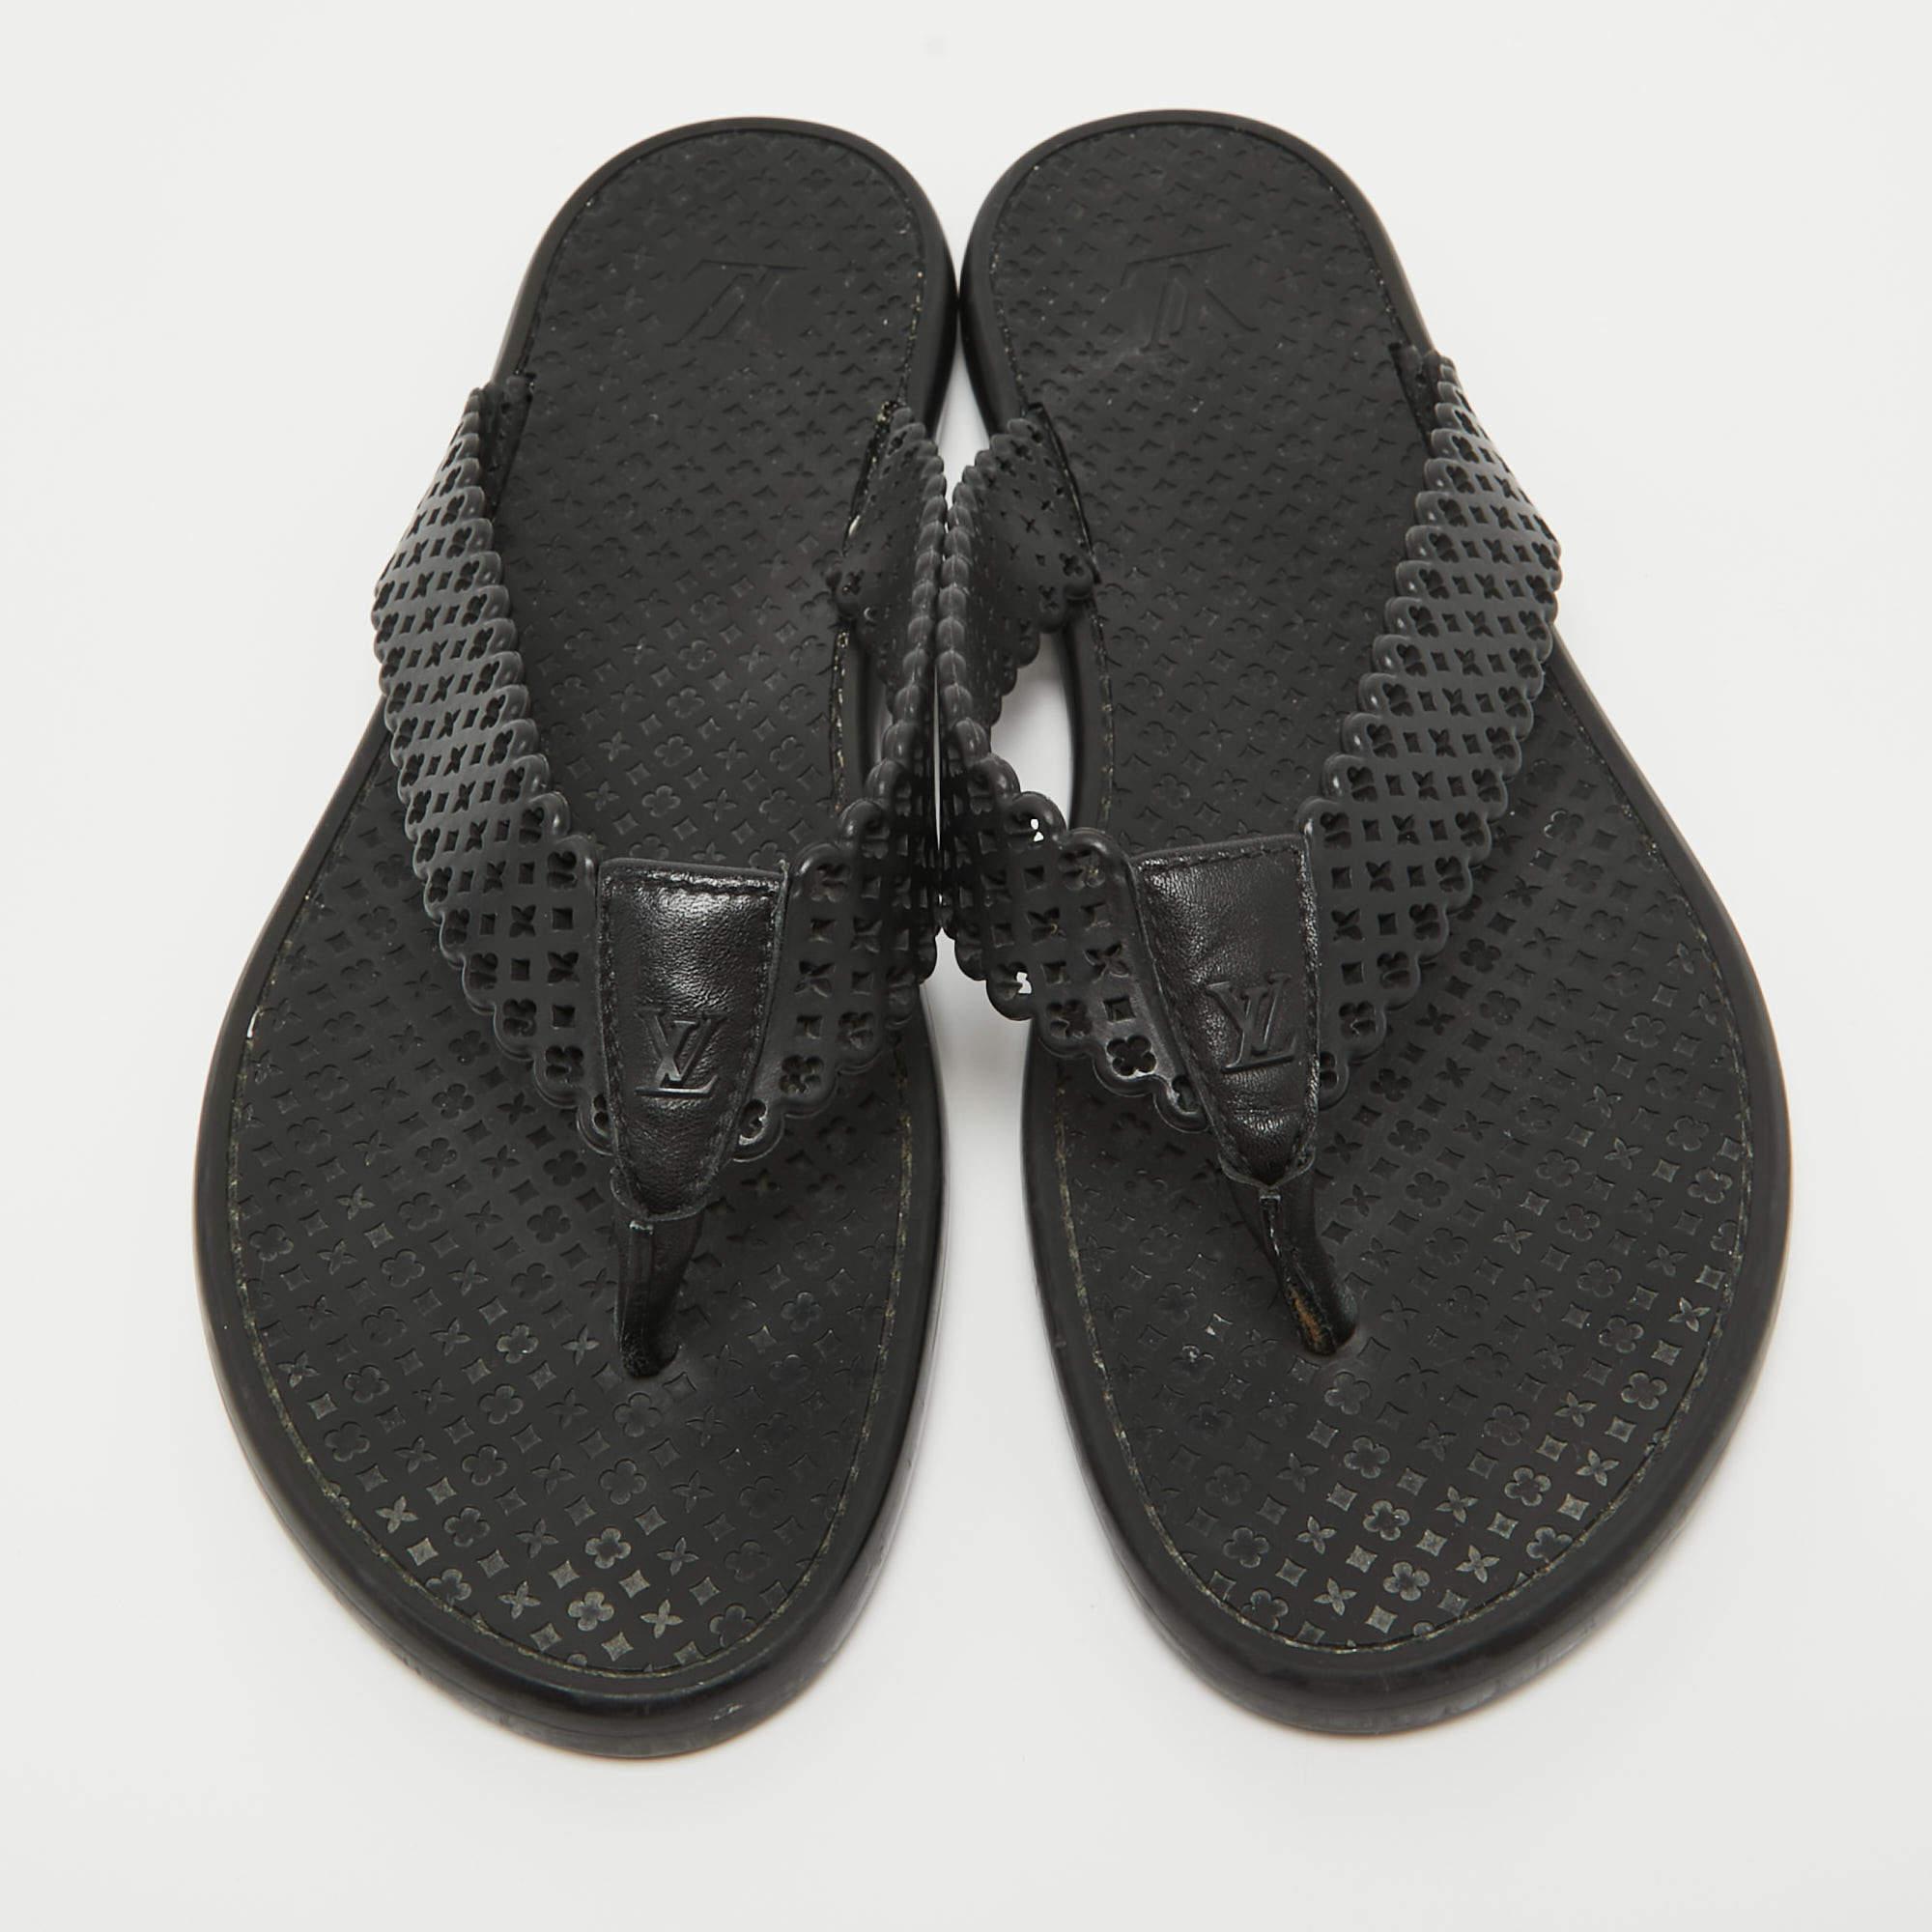 Wear these designer sandals to spruce up any outfit. They are versatile, chic, and can be easily styled. Made using quality materials, these sandals are well-built and long-lasting.

Includes
Original Dustbag